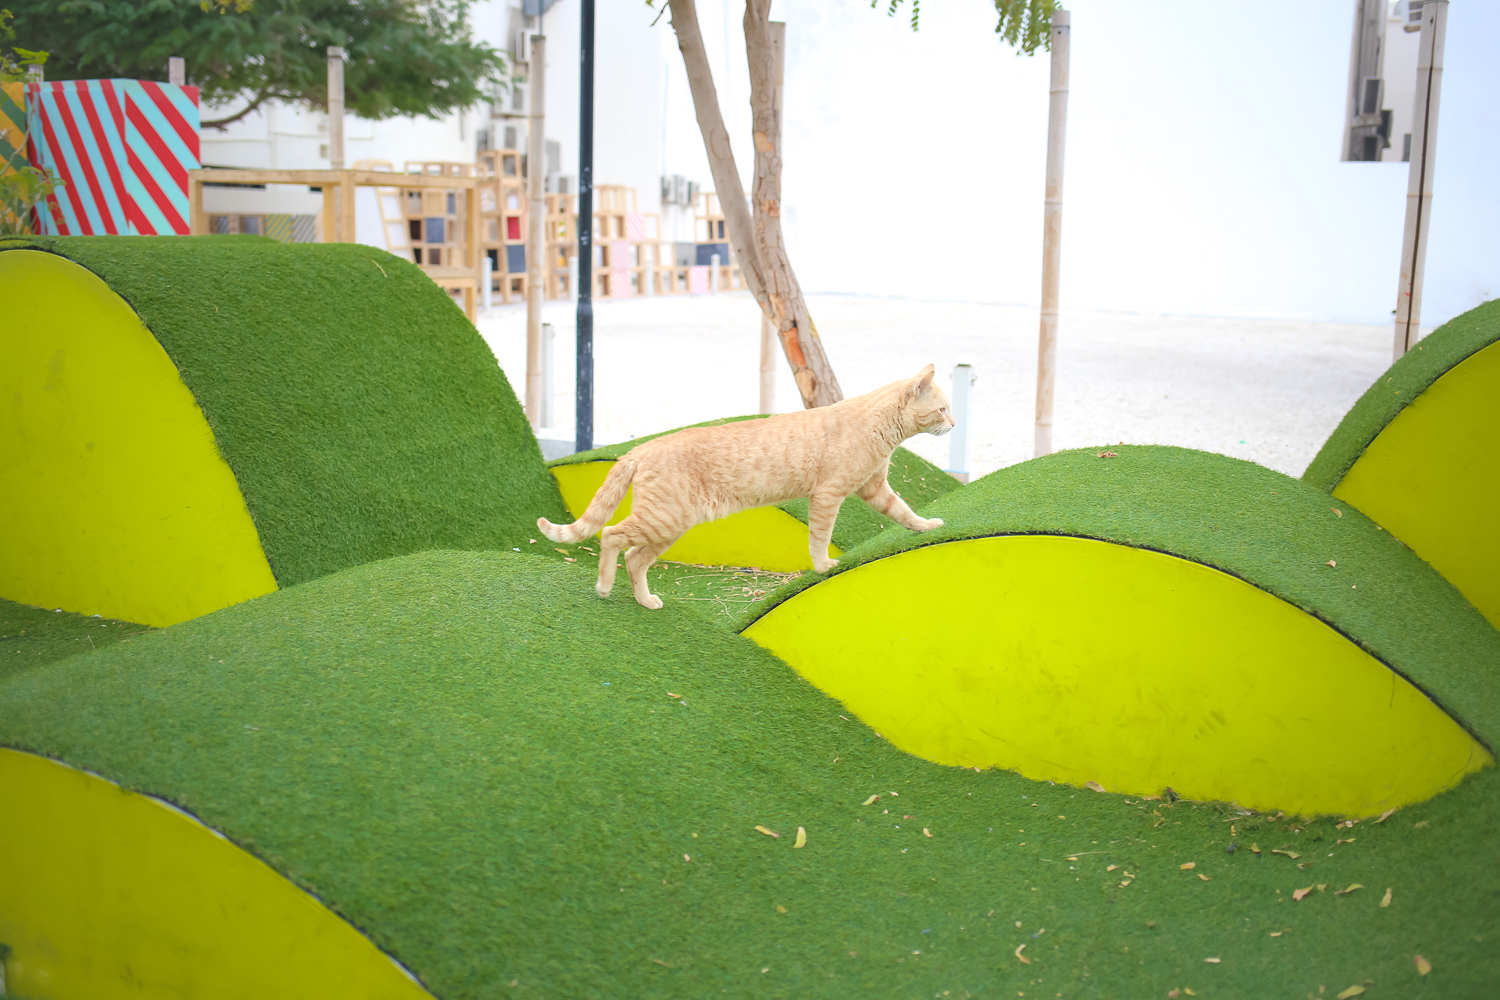 Public art and play space in the Adliya District of Manama, Bahrain.